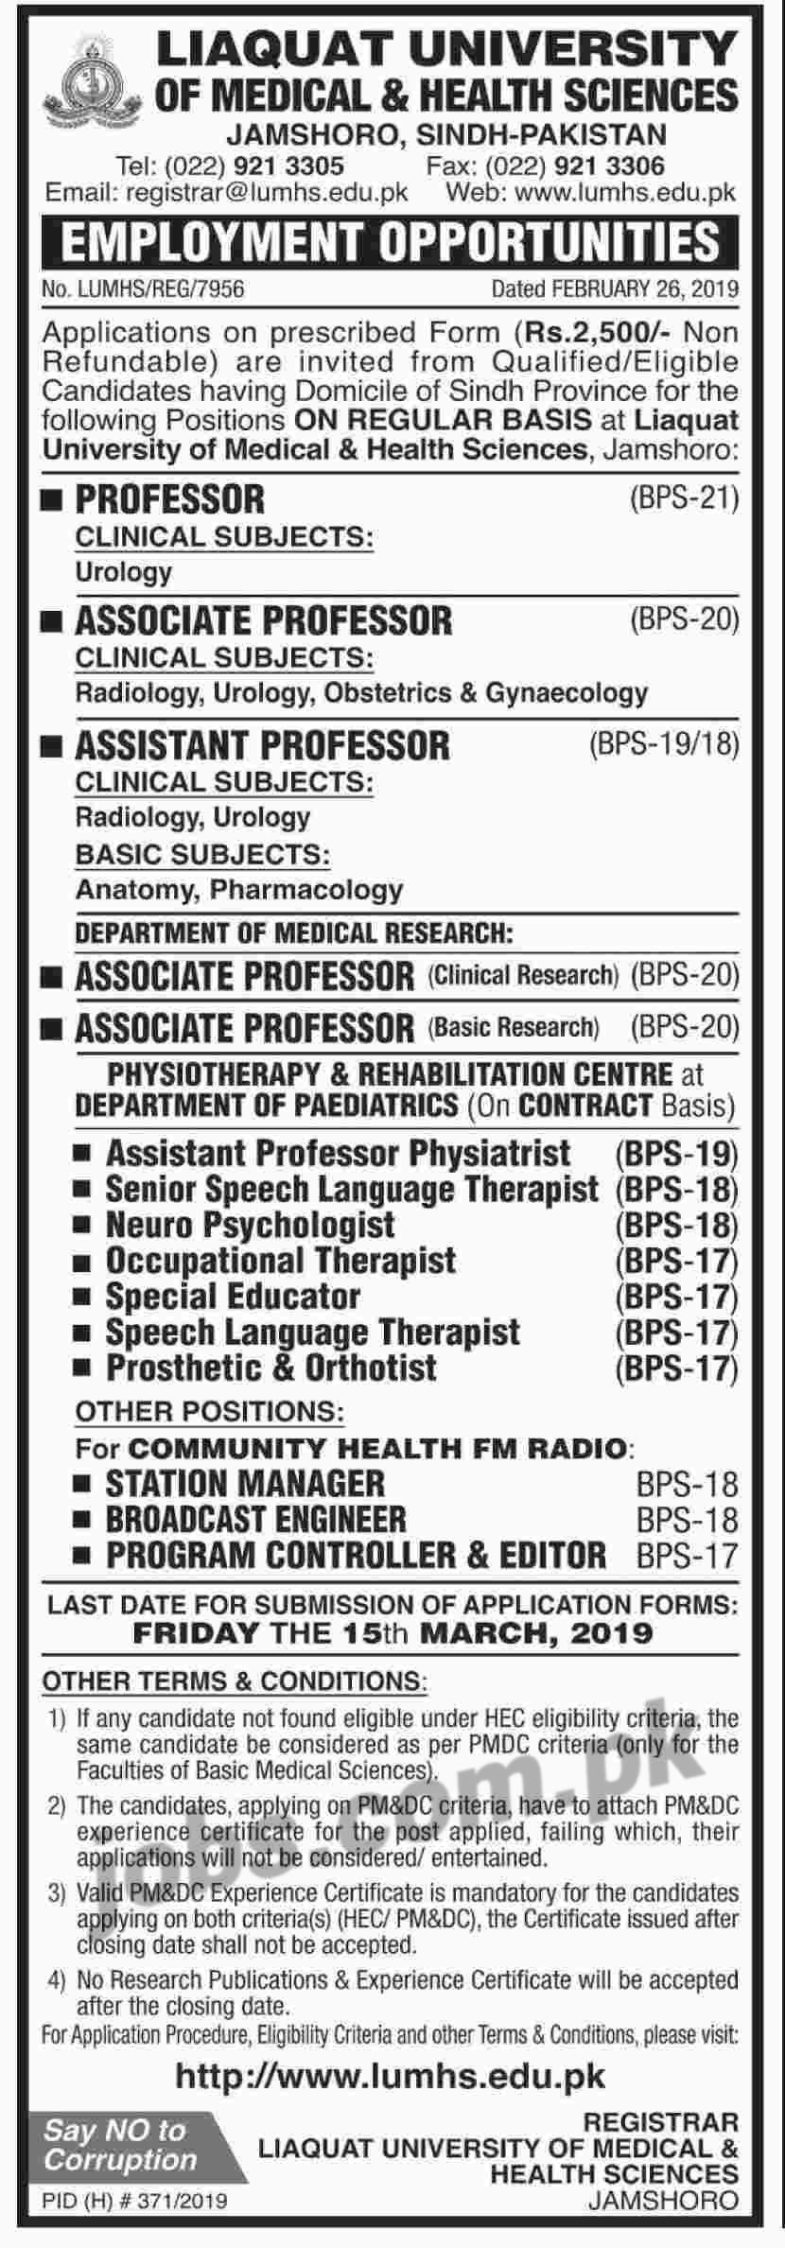 Liaquat University of Medical & Health Sciences Jobs 2019 for Media/Radio, Medical, Educator and Teaching Faculty